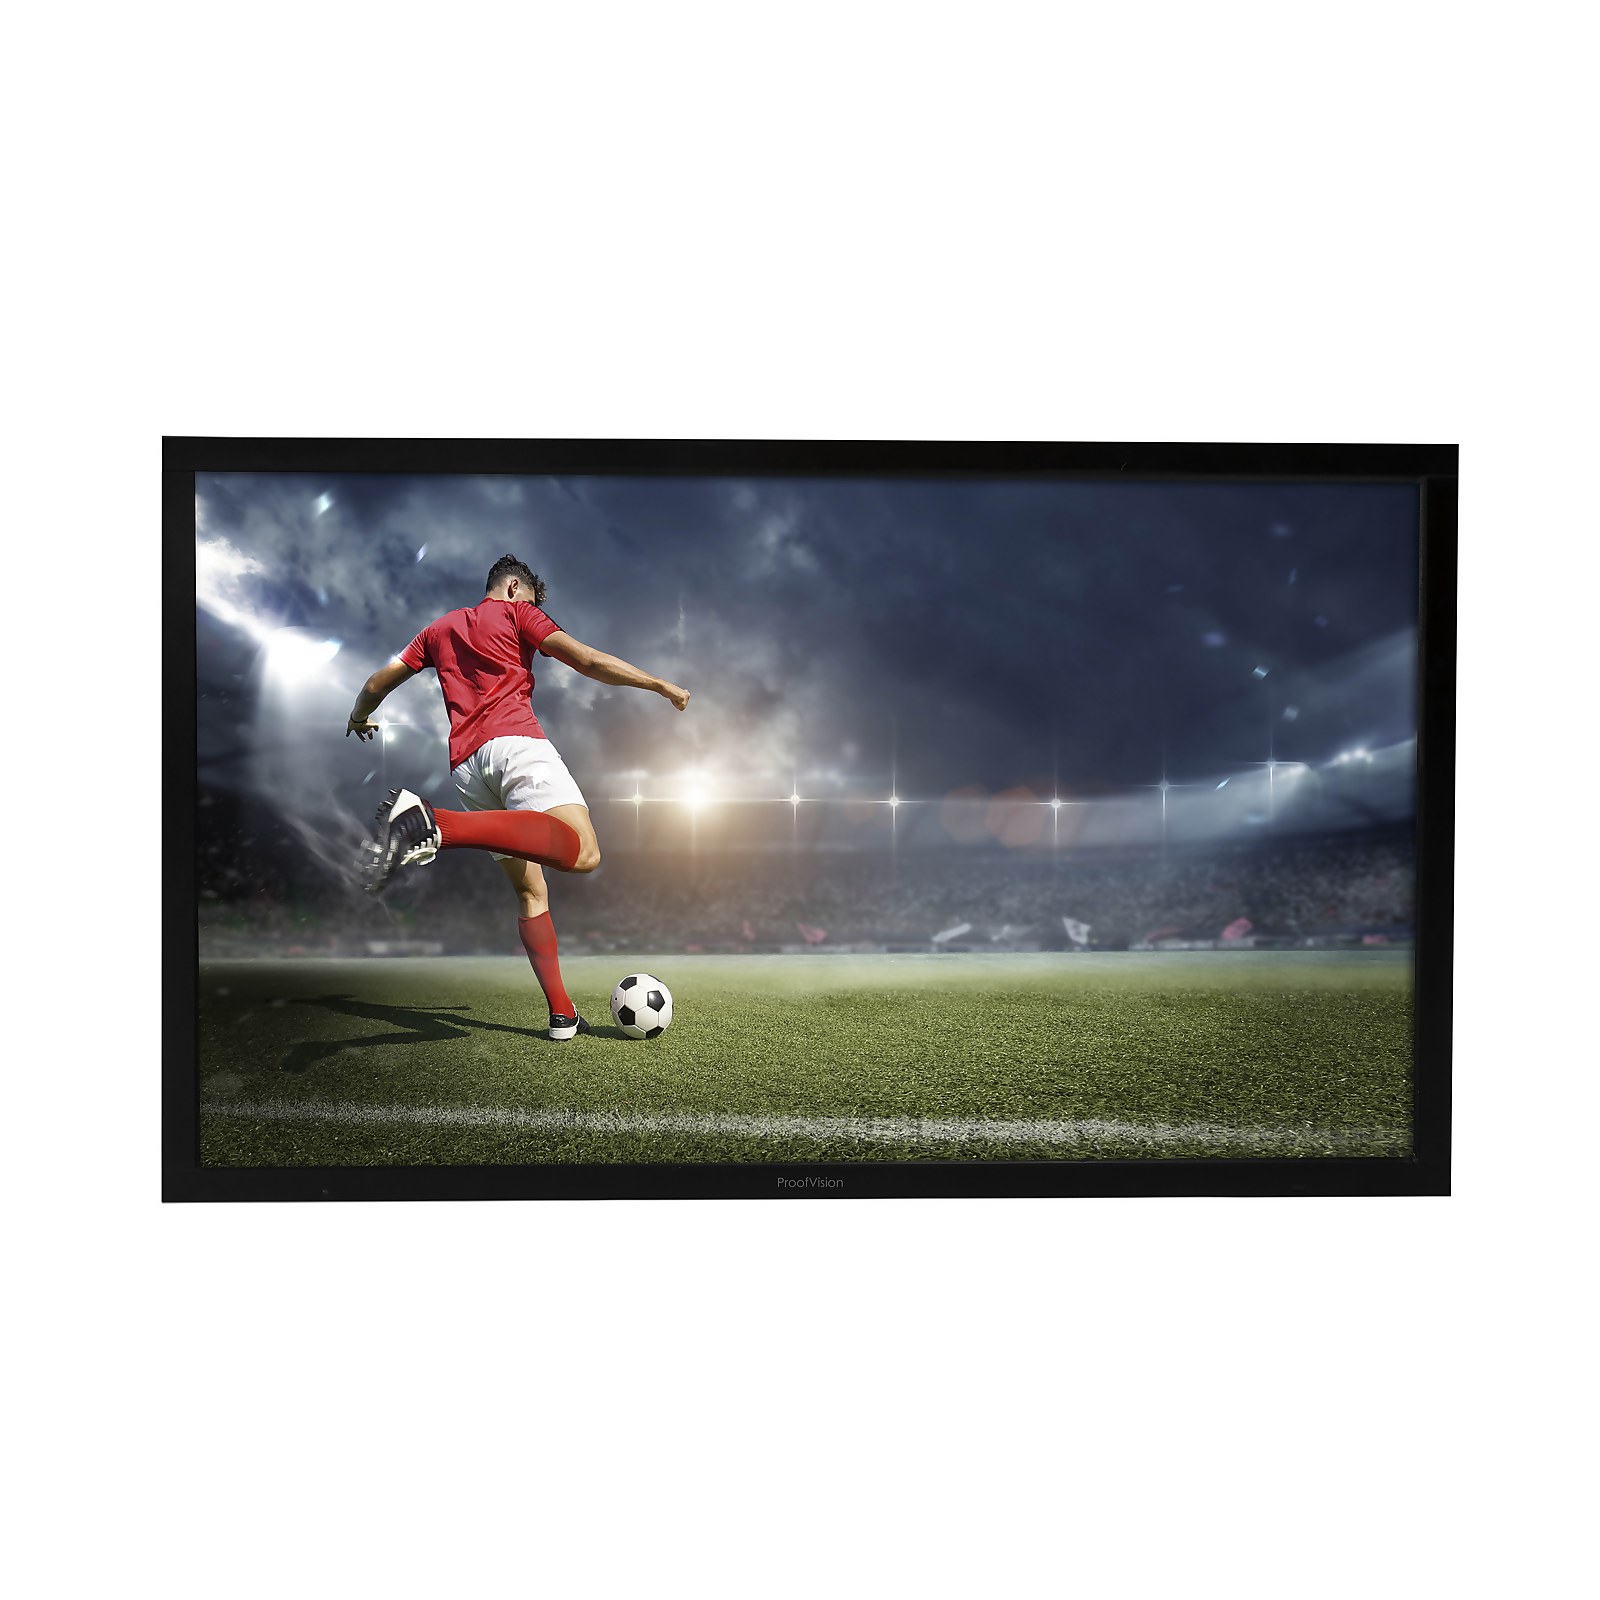 Photo of Proofvision 43in Lifestyle Plus Smart Outdoor Tv - Black